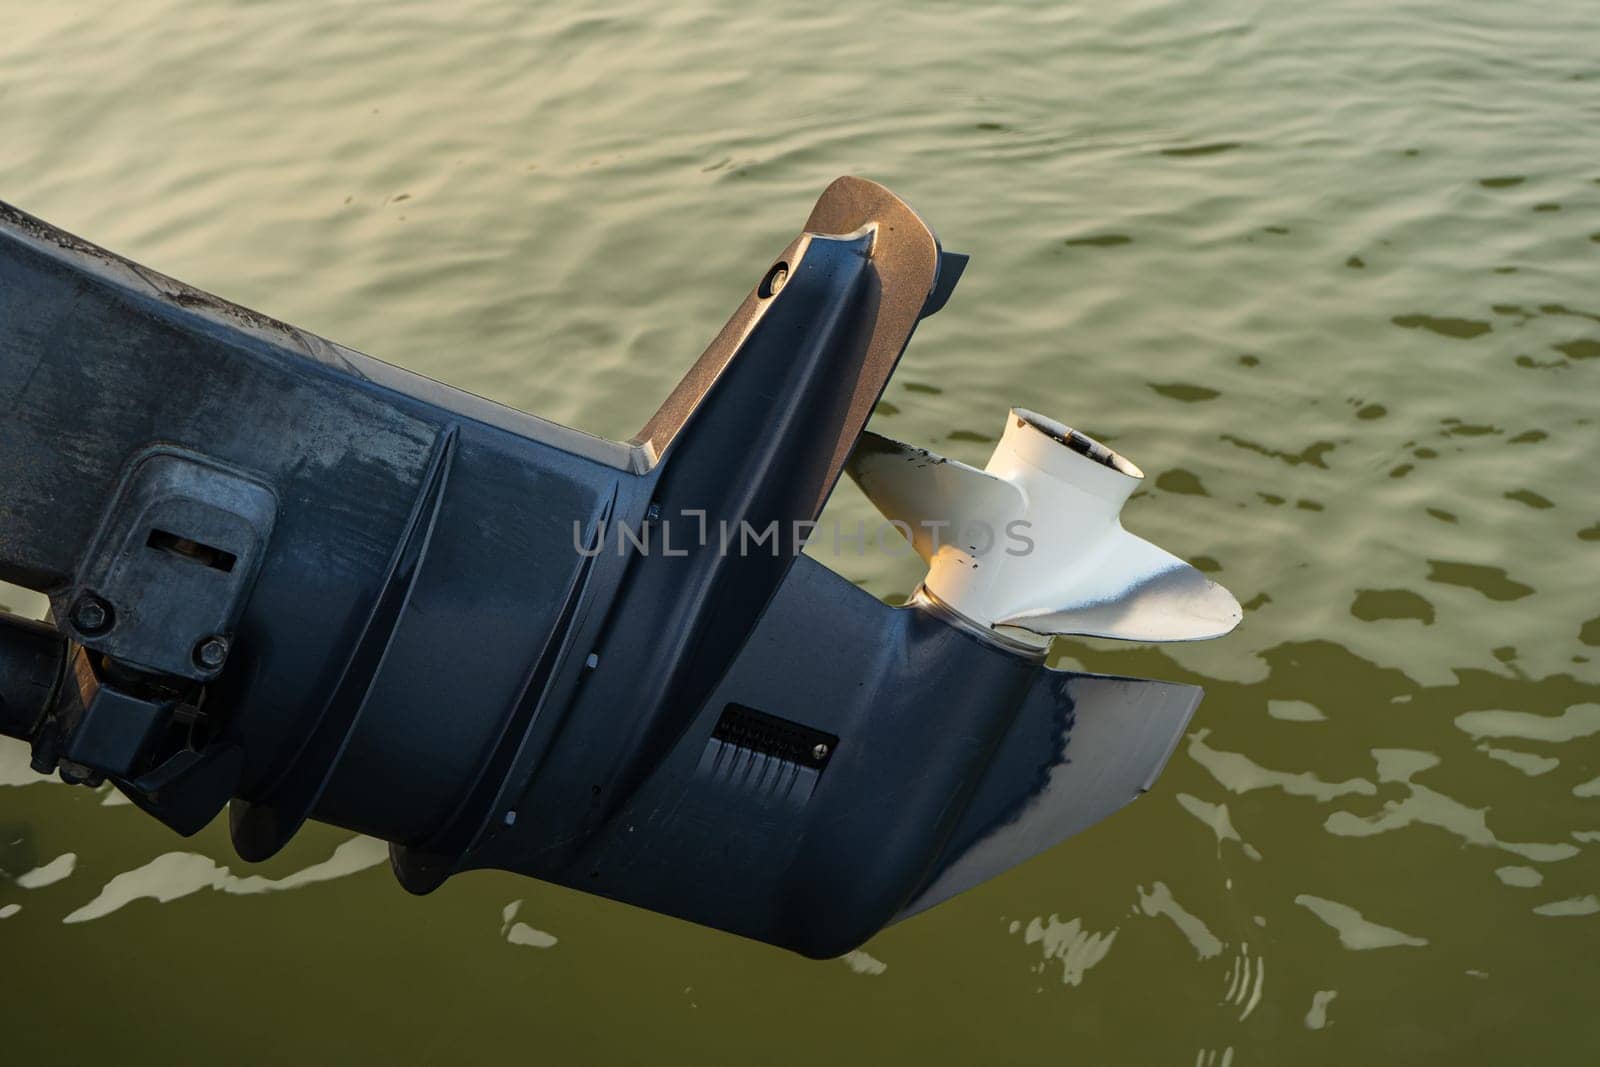 Outboard motor with exposed propeller